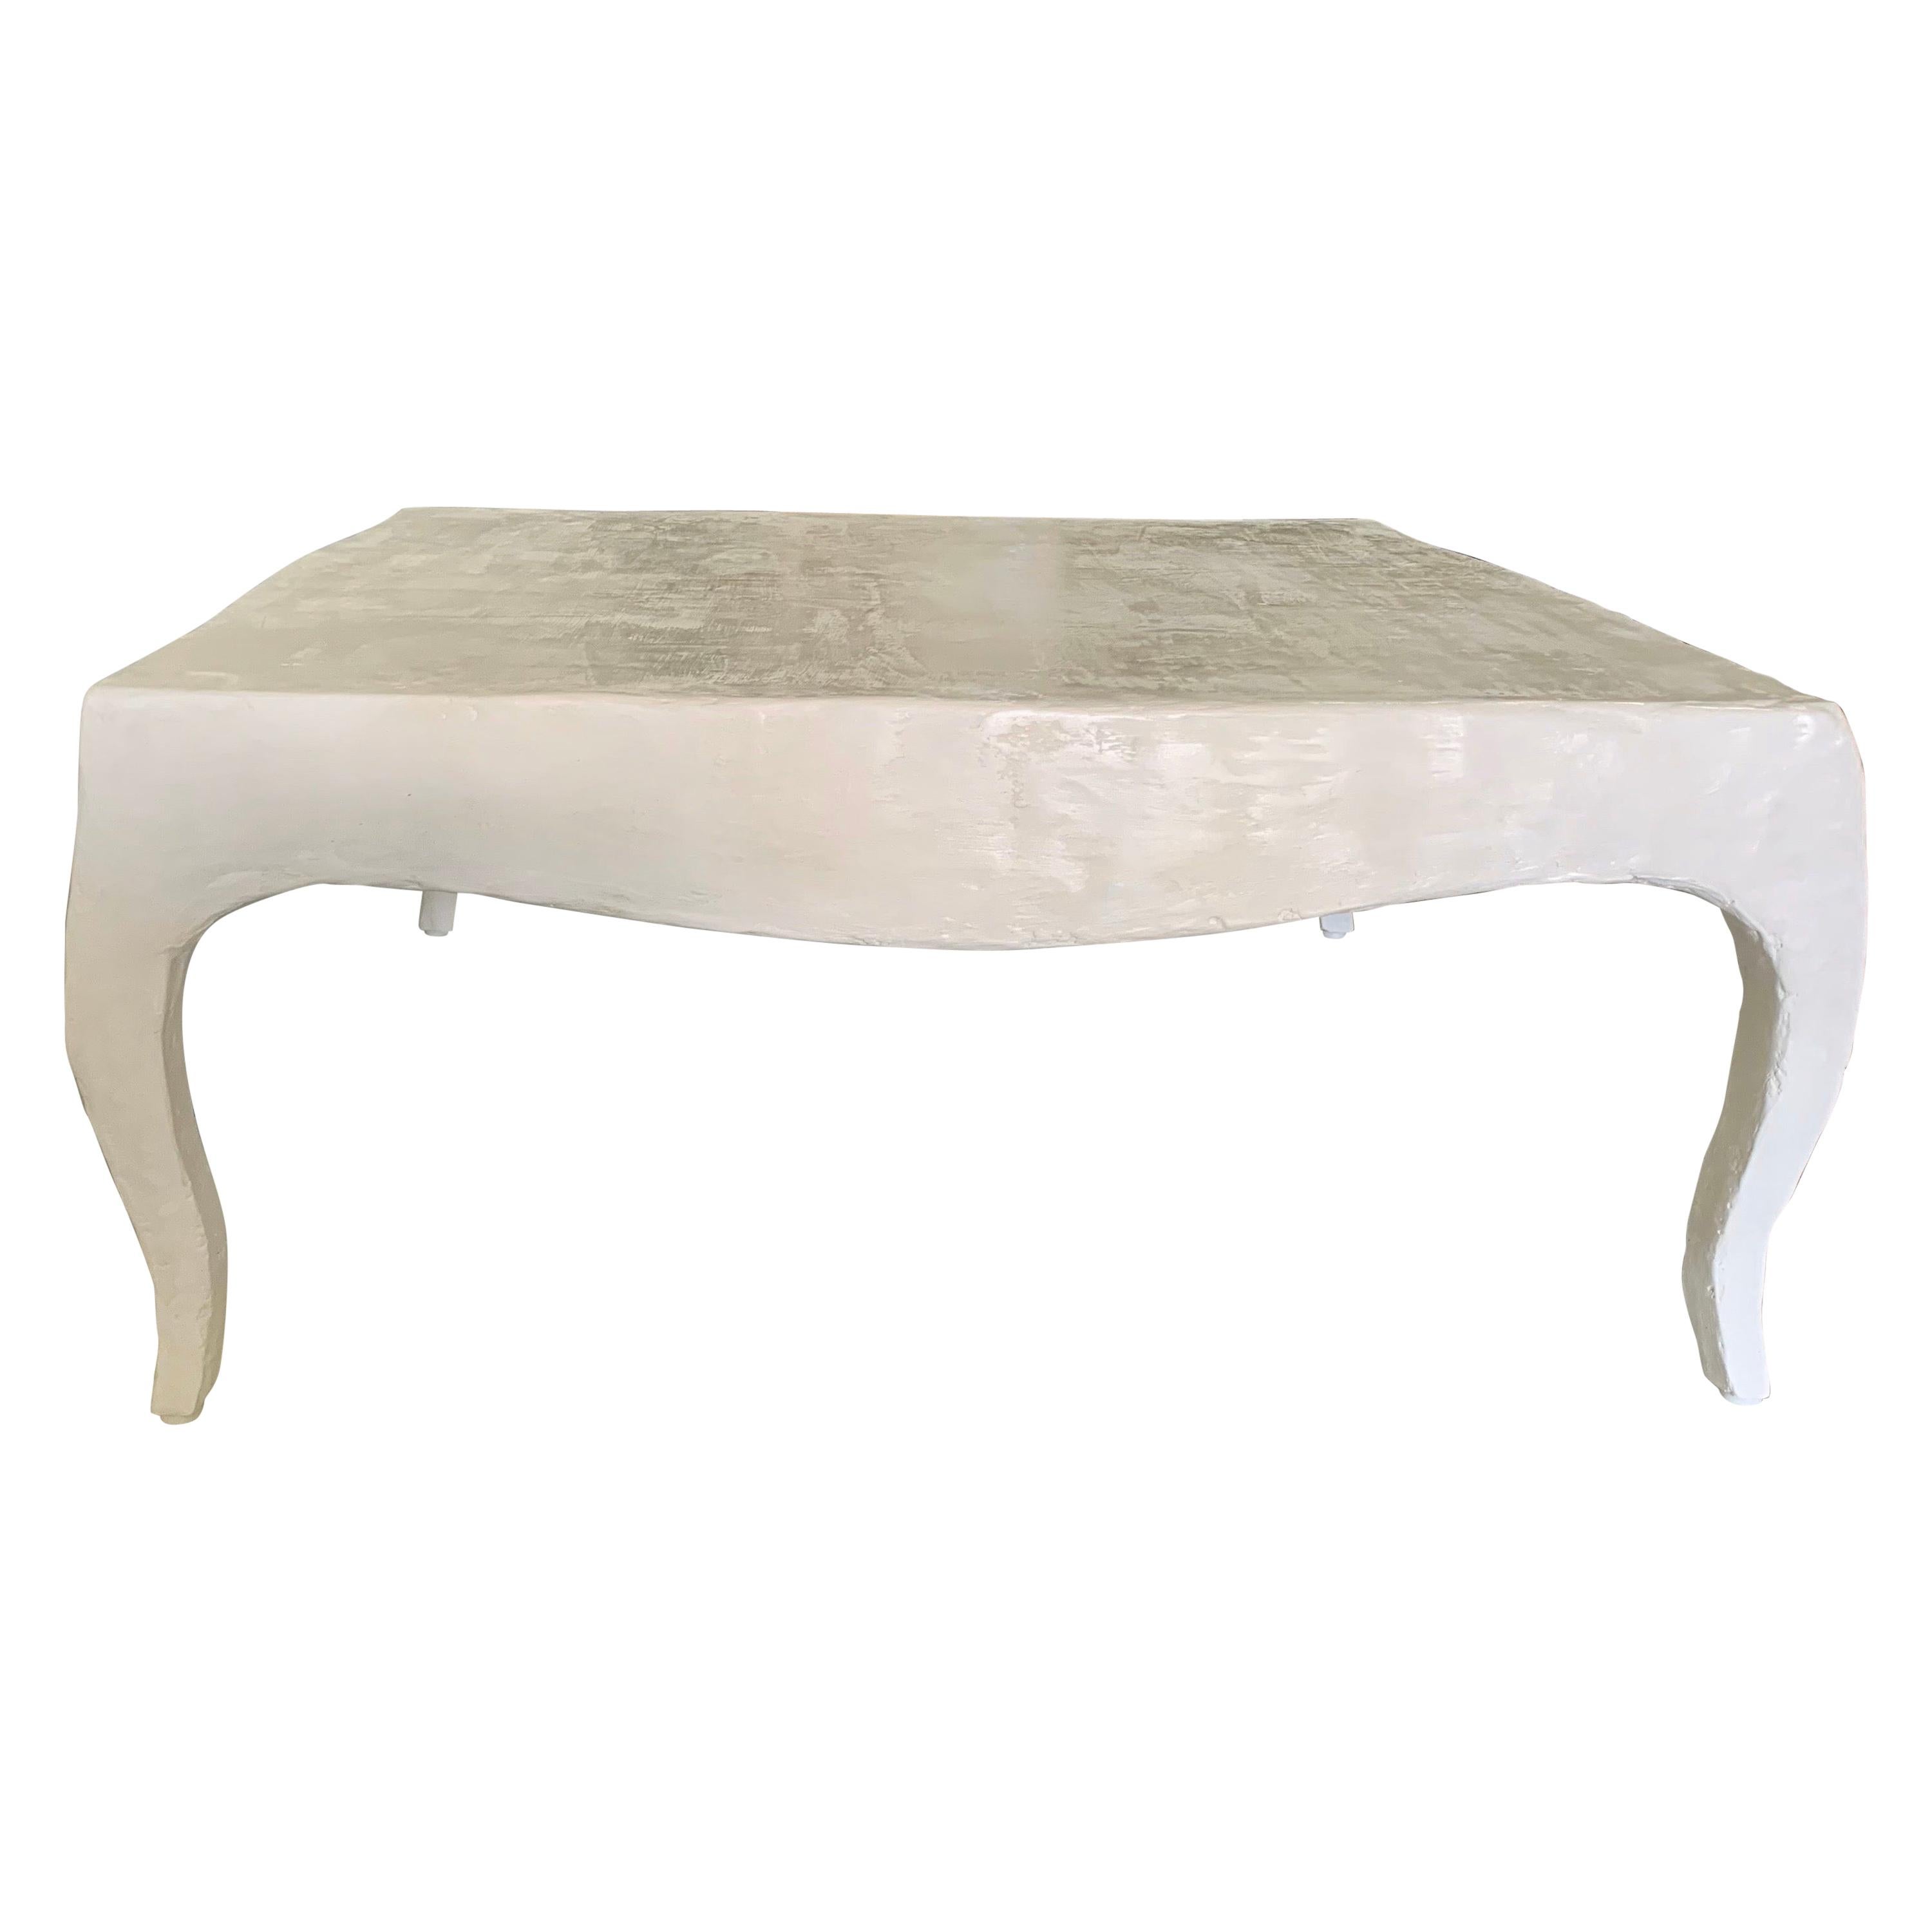 Elegant French Plaster Textured Cocktail Table with Cabriolet Legs, For Sale